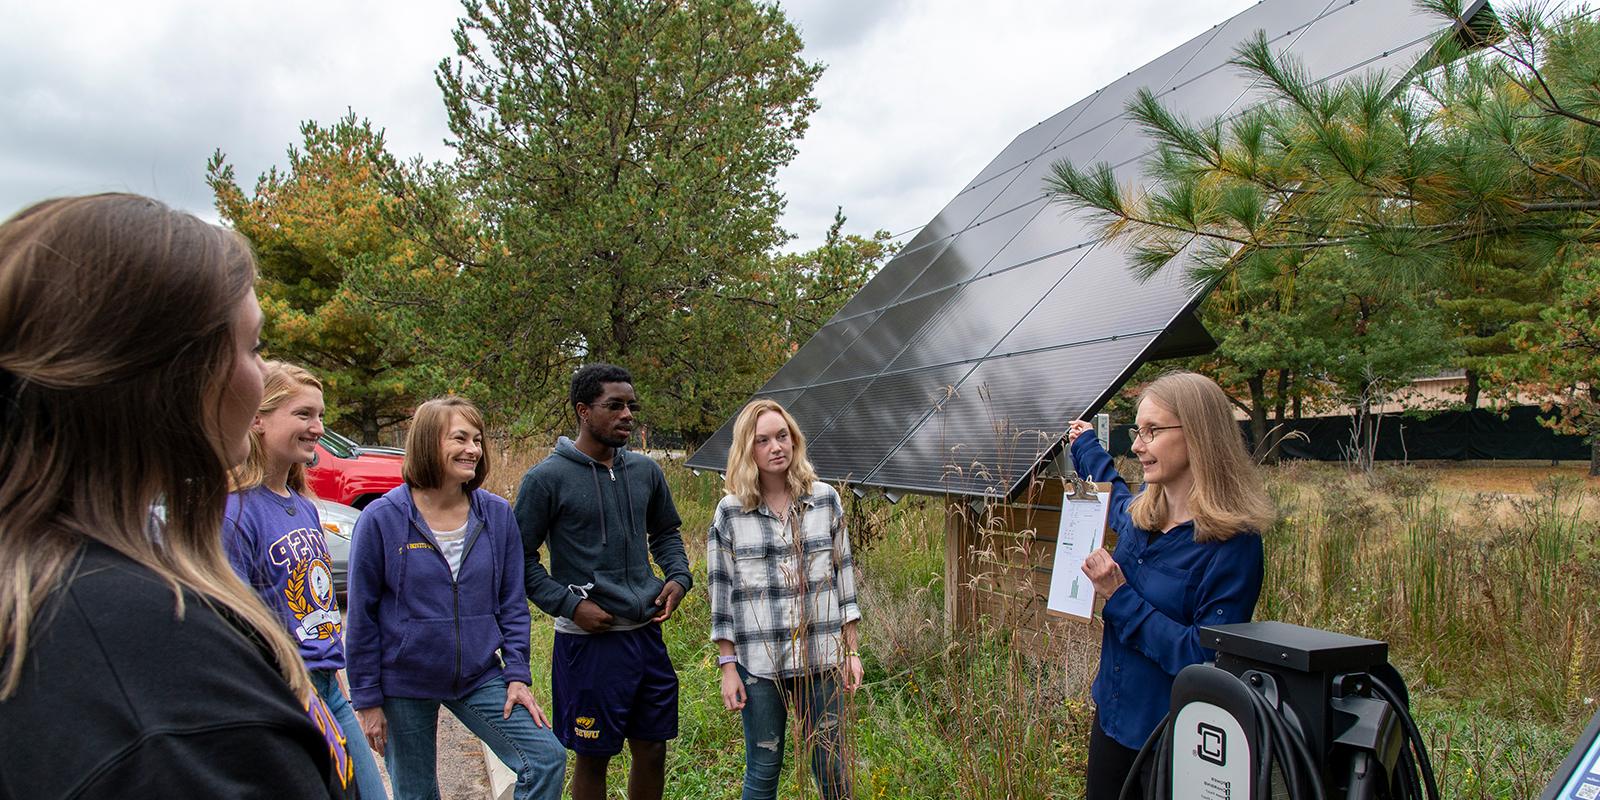 Professor and group of students looking at solar panel